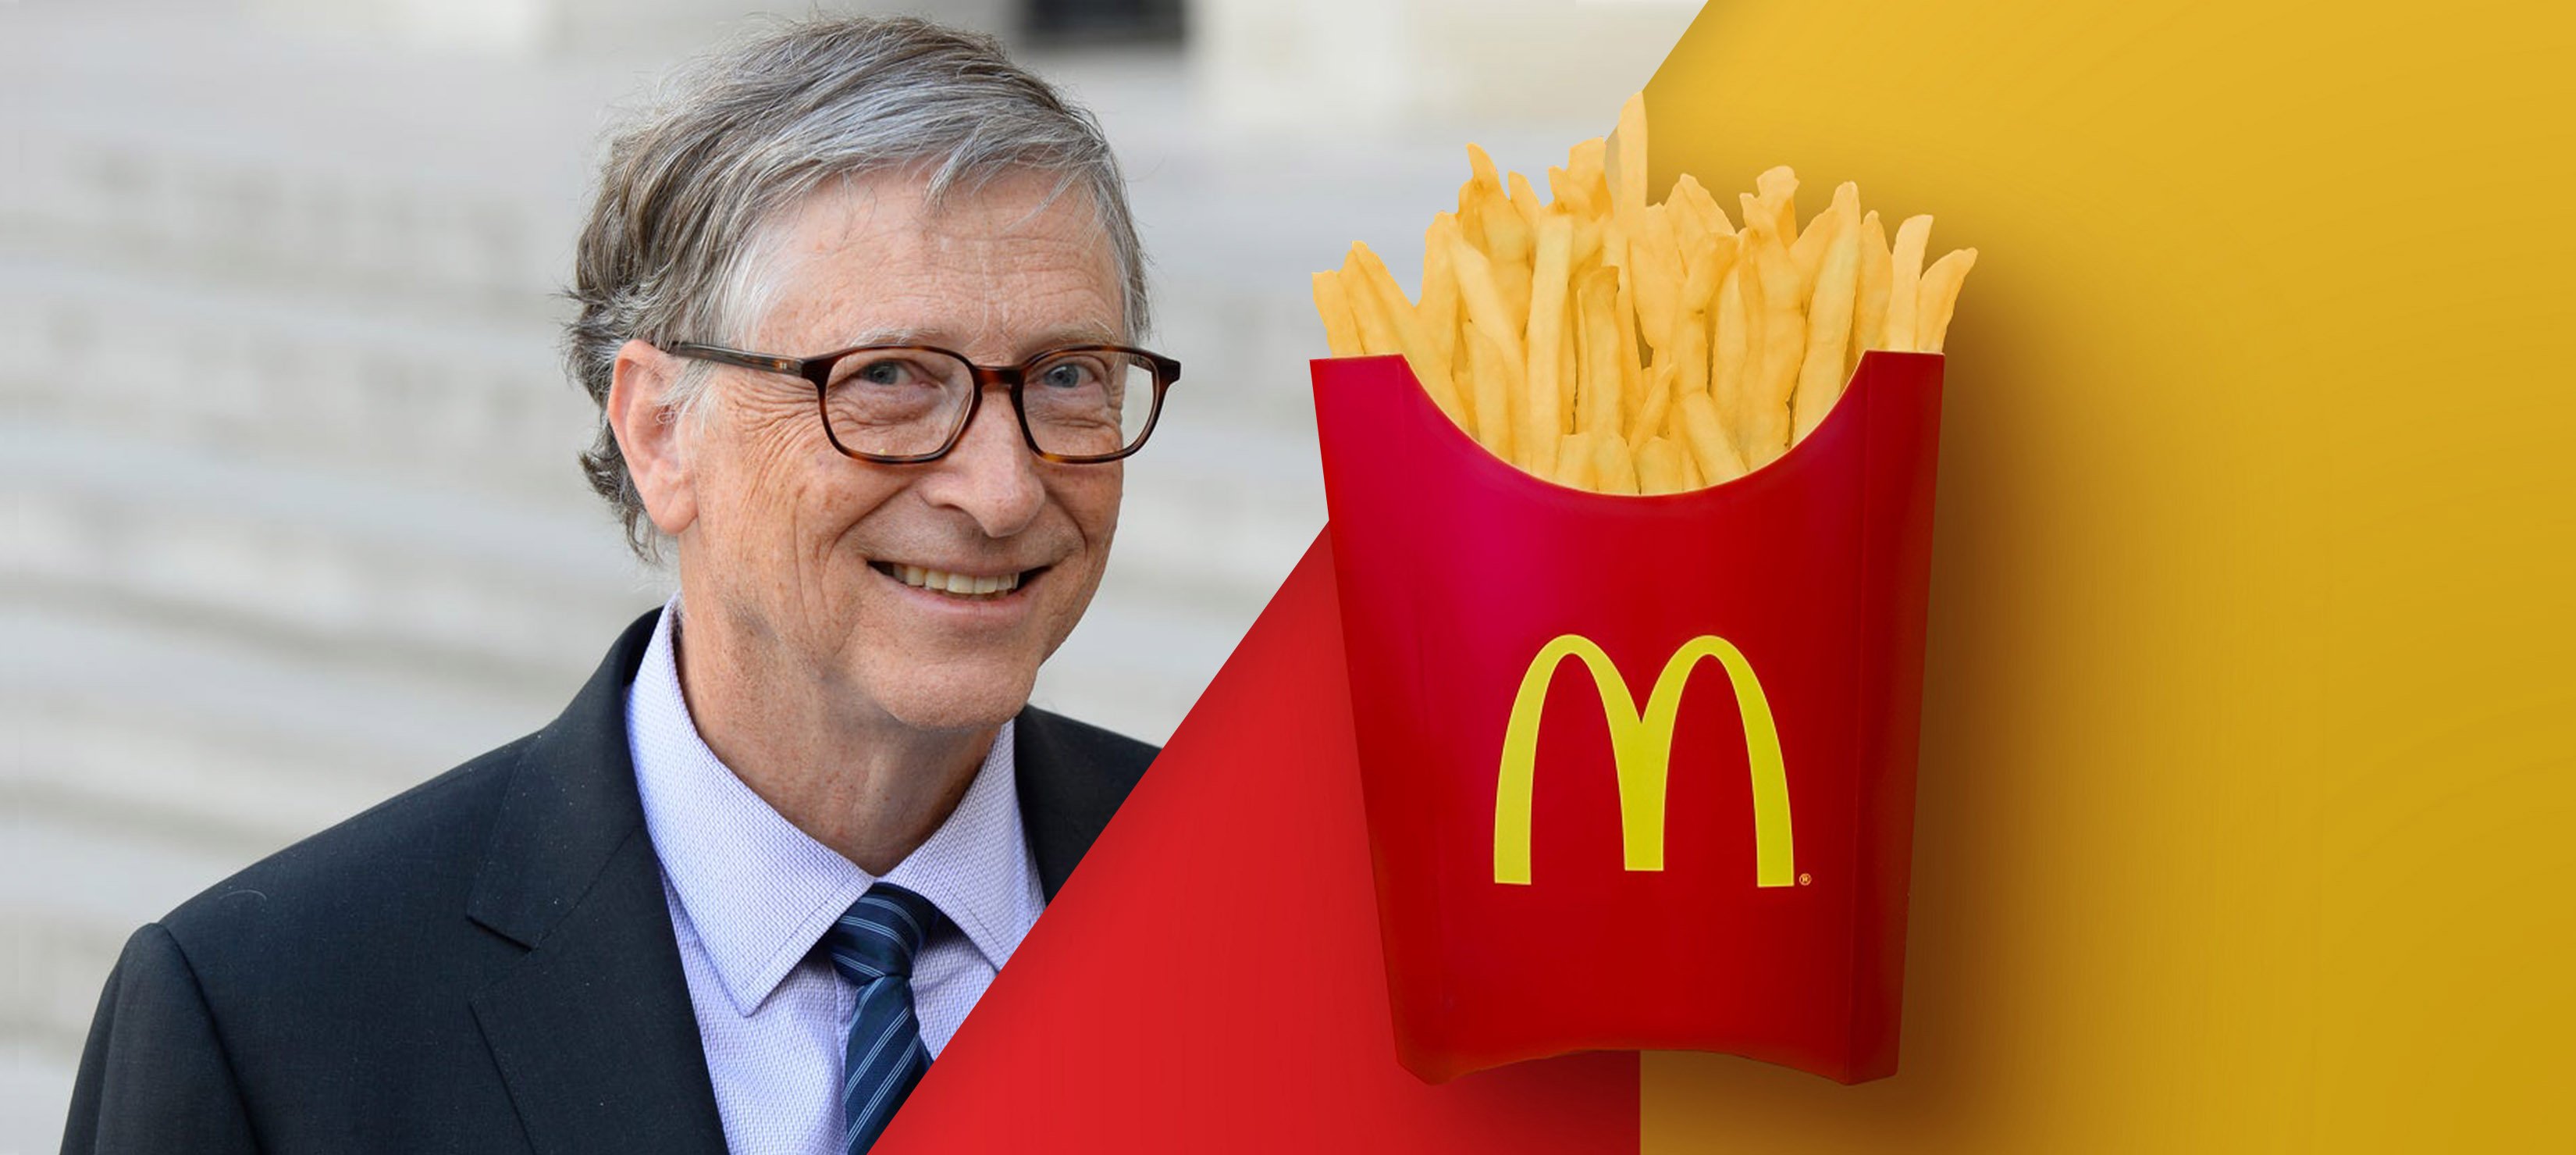 Does Bill Gates Own McDonald's?